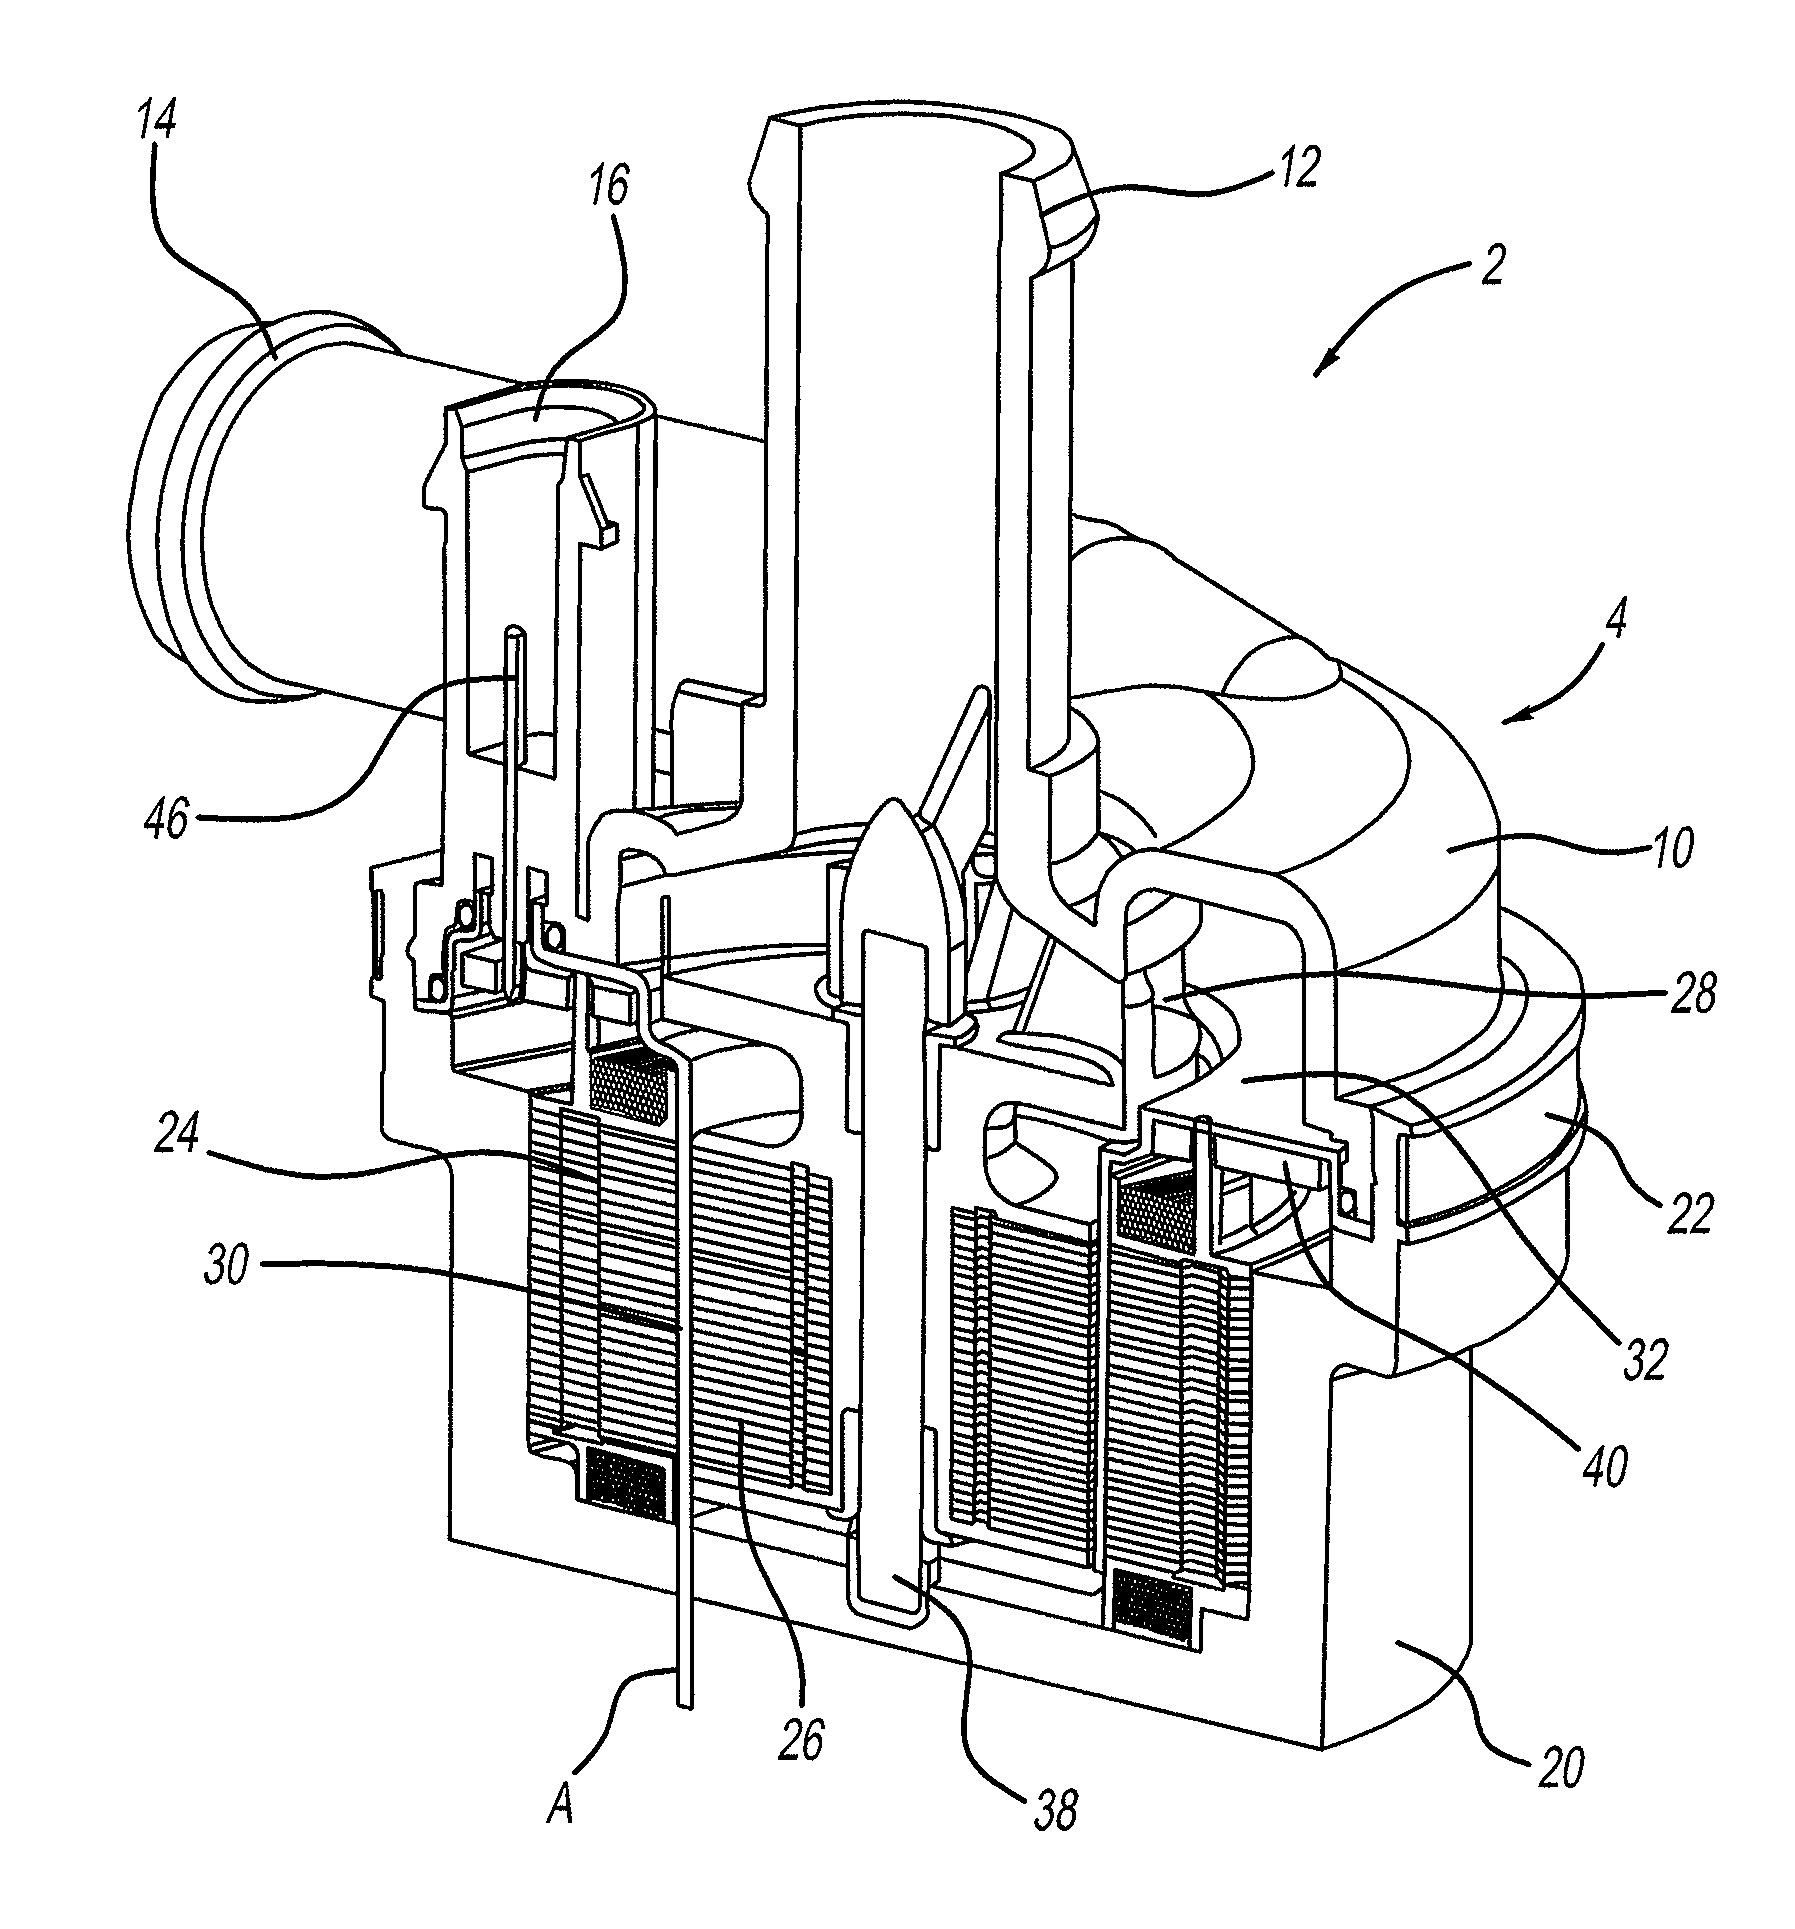 Submerged rotor electric water pump with structural wetsleeve